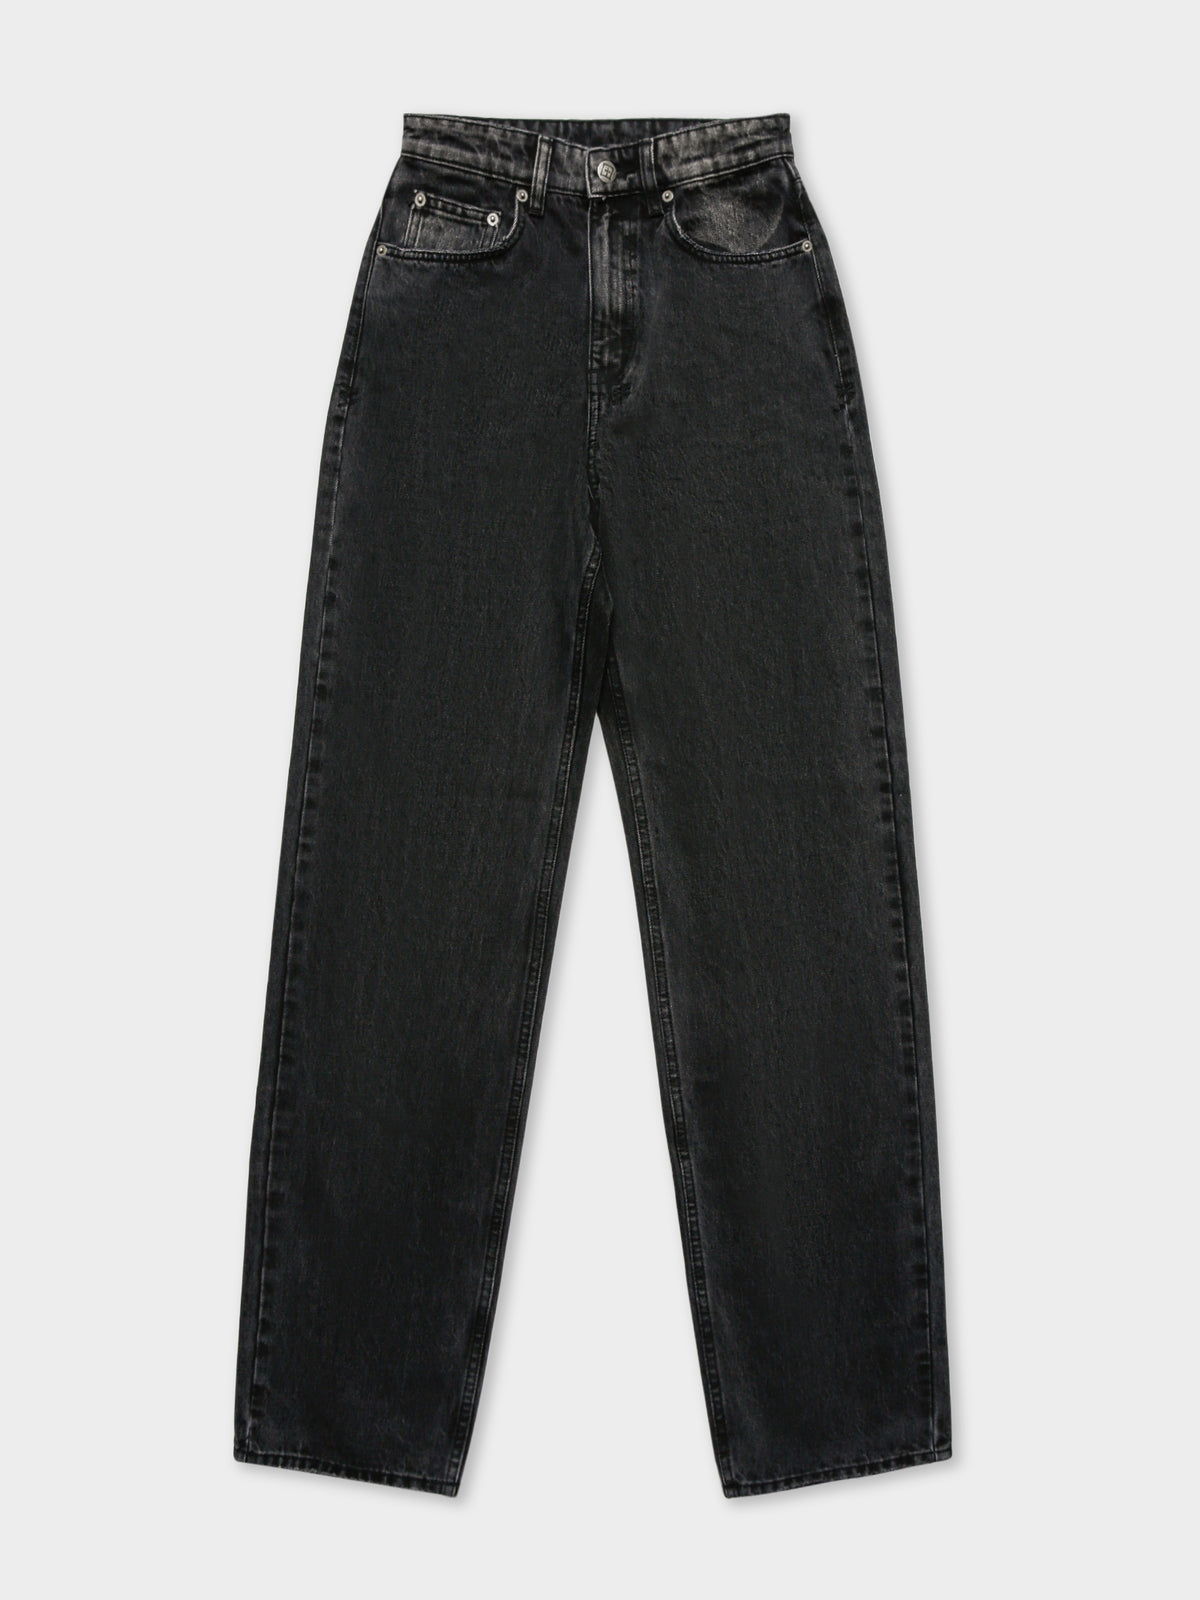 Playback Onyx Jeans in Black